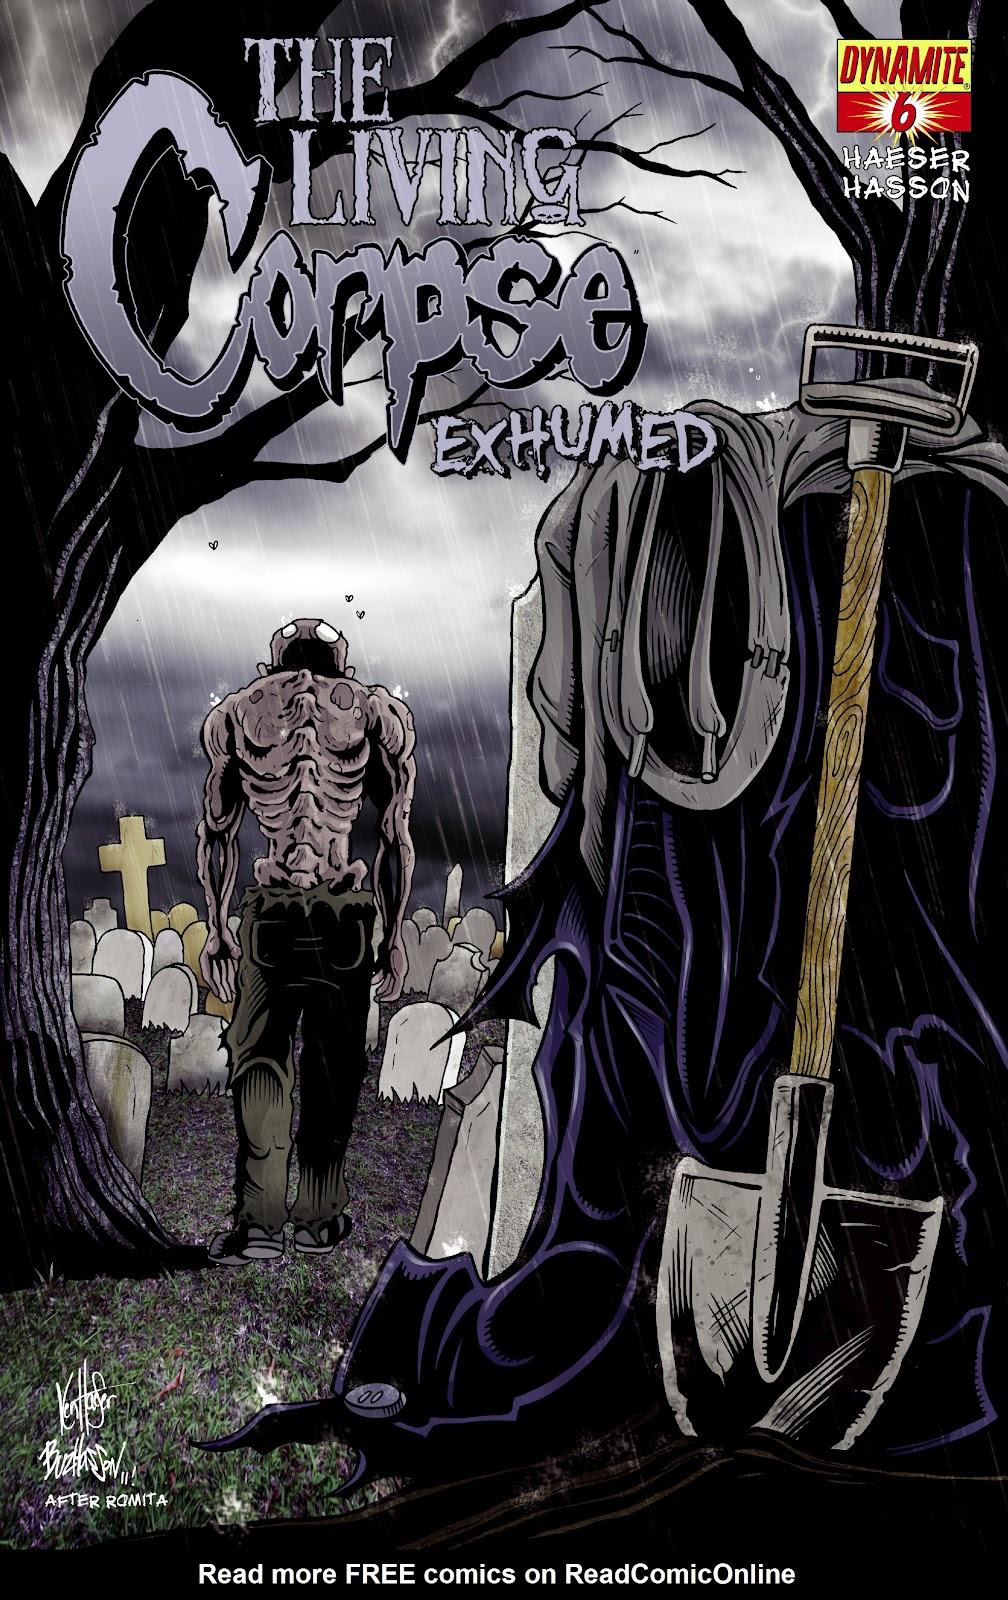 The Living Corpse: Exhumed issue 6 - Page 1